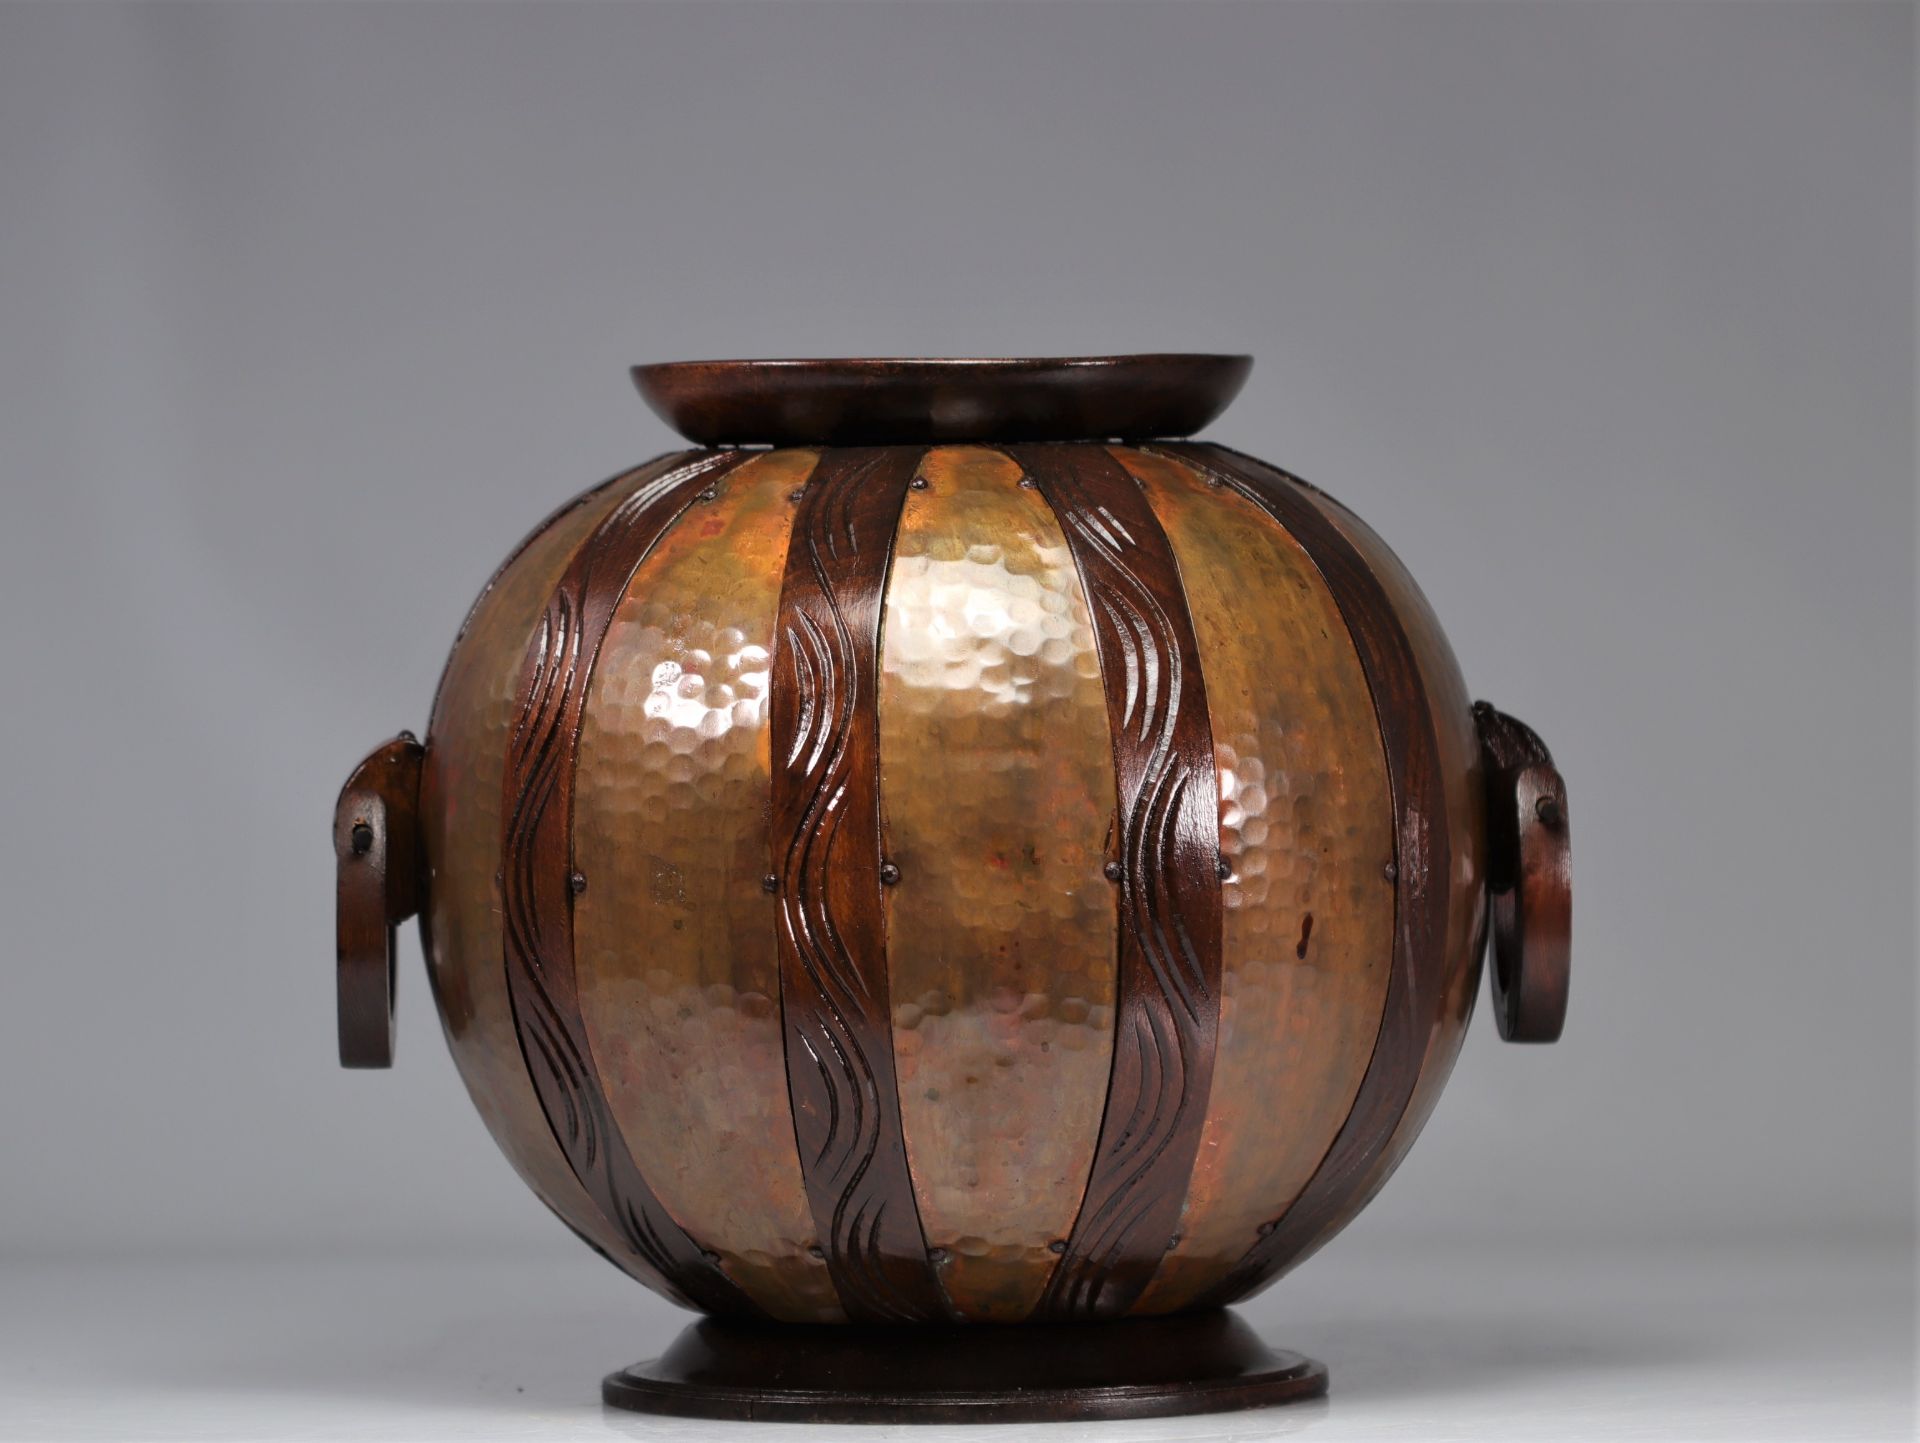 Gustave SERRURIER-BOVY (1858-1910) Hammered copper and wood ball vase